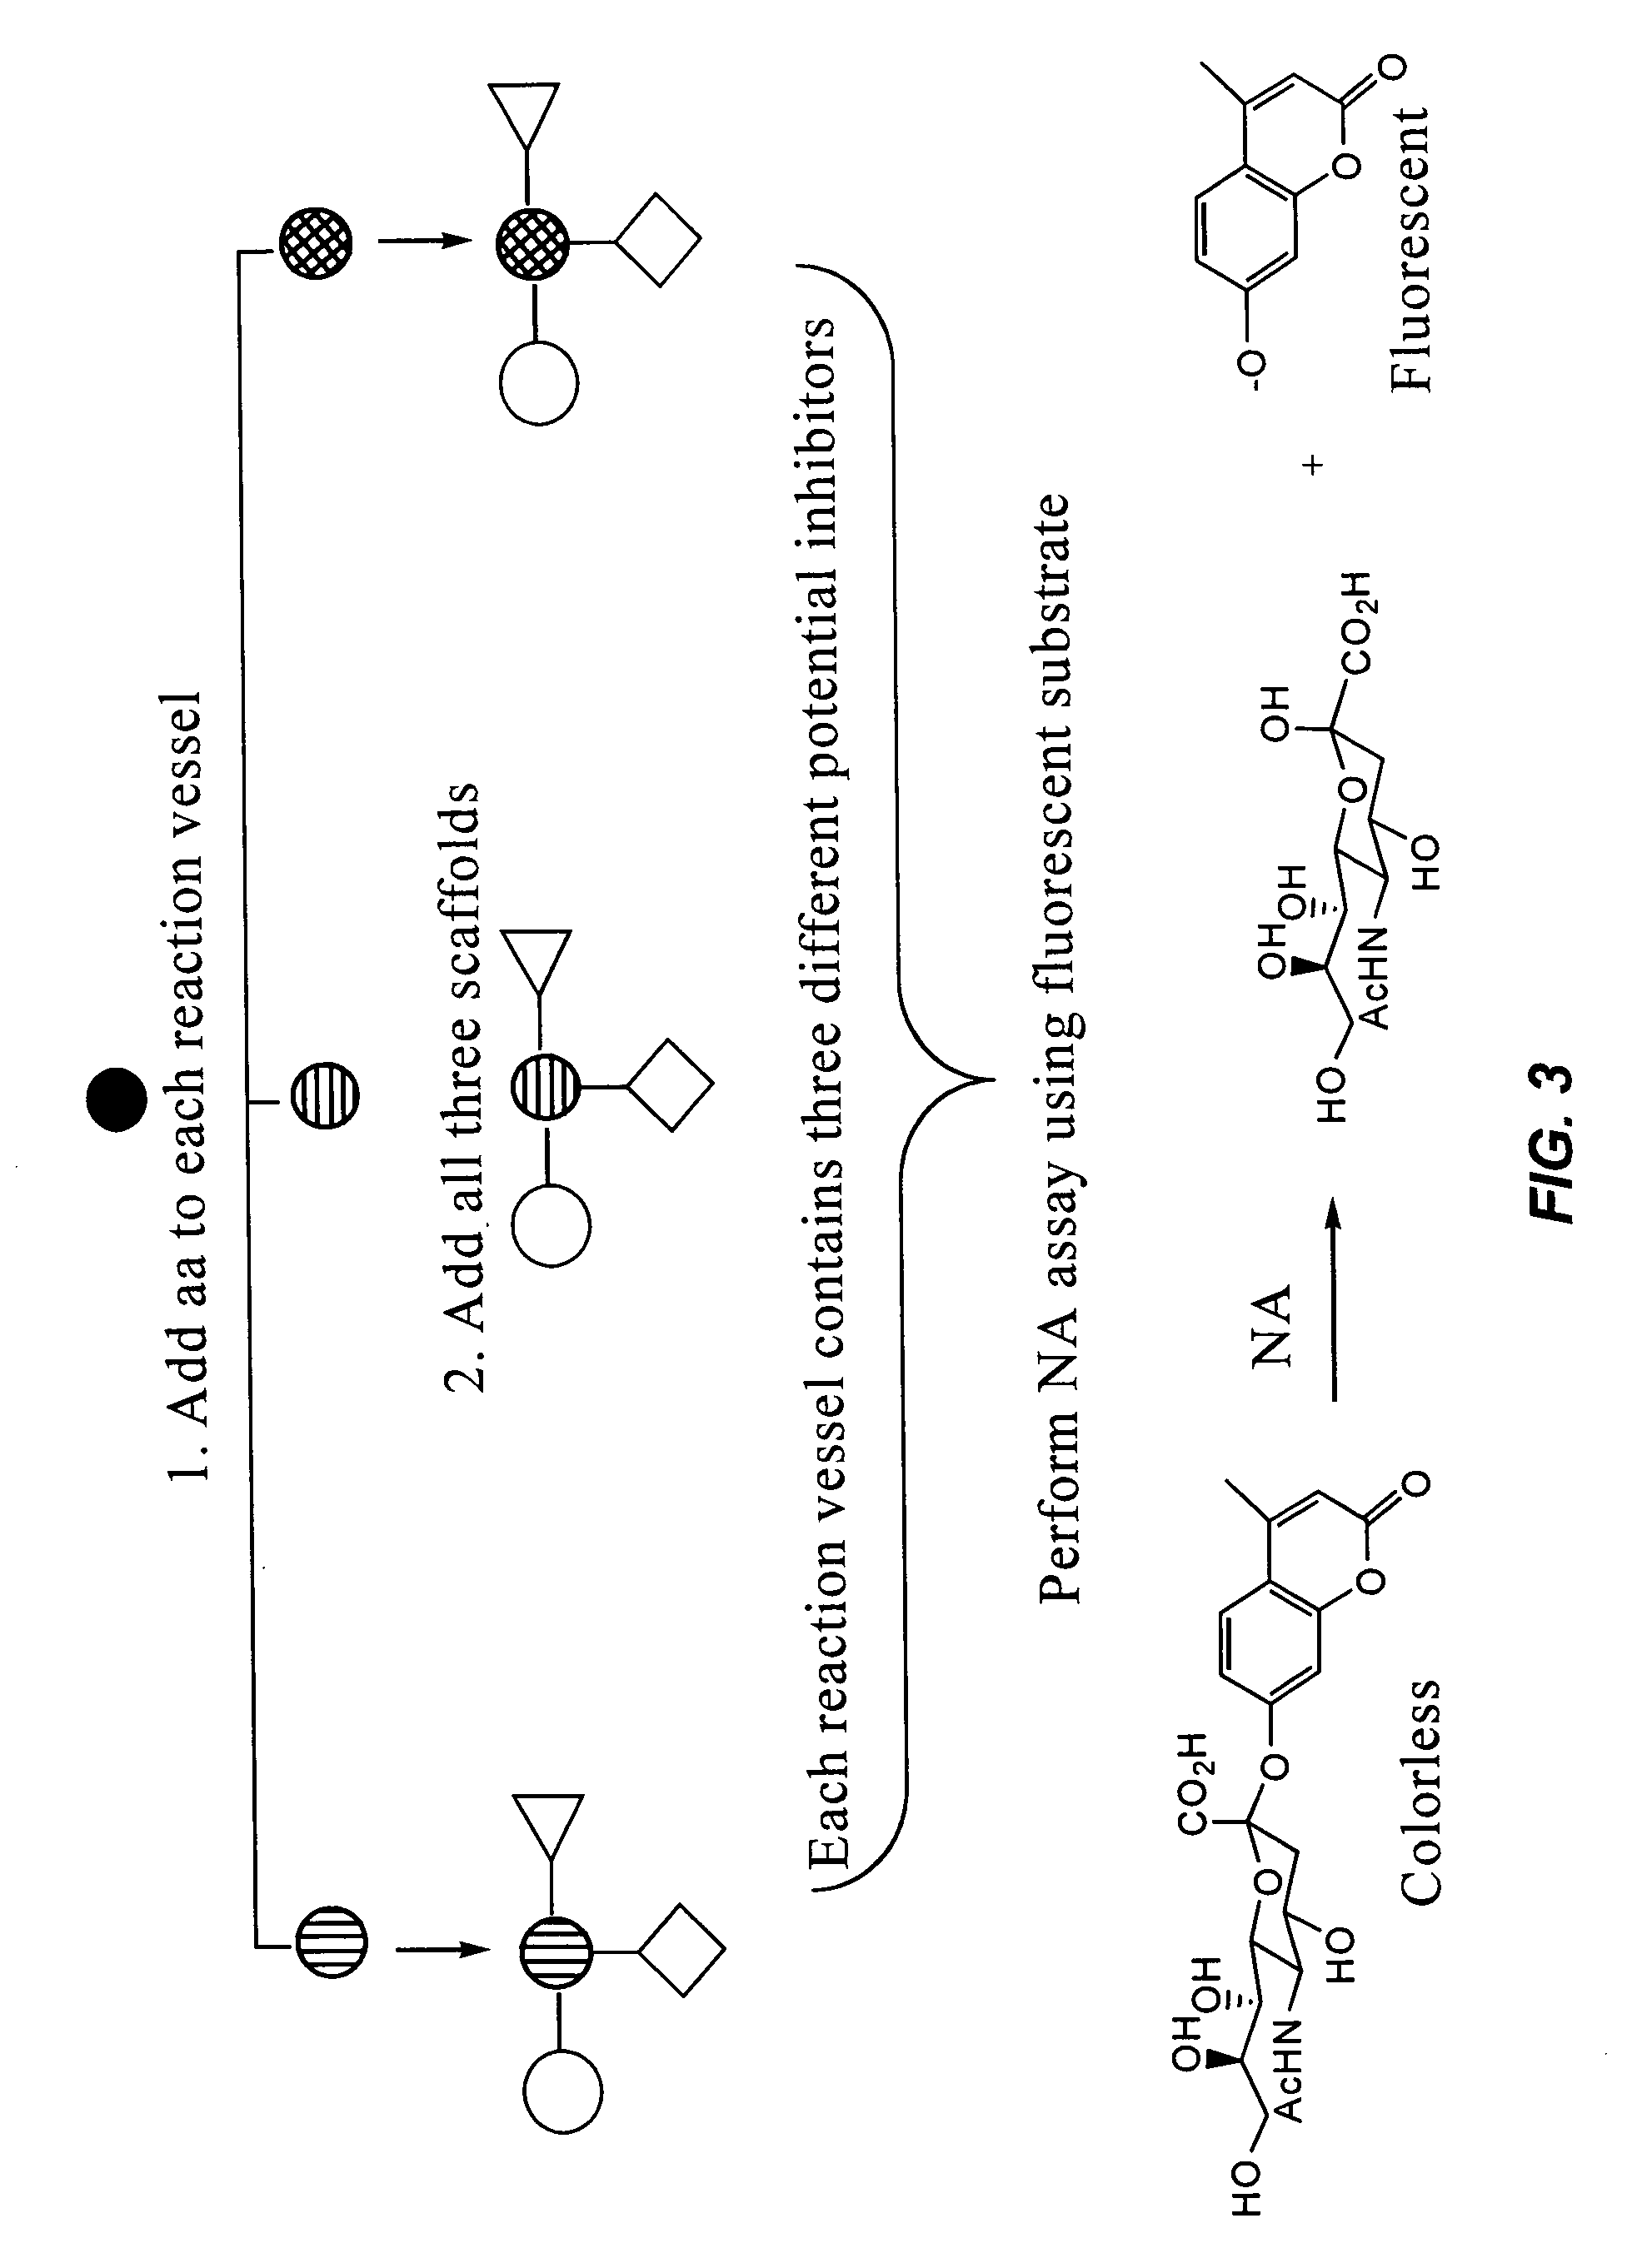 Labeled substrate conjugates for identifying enzyme inhibitors